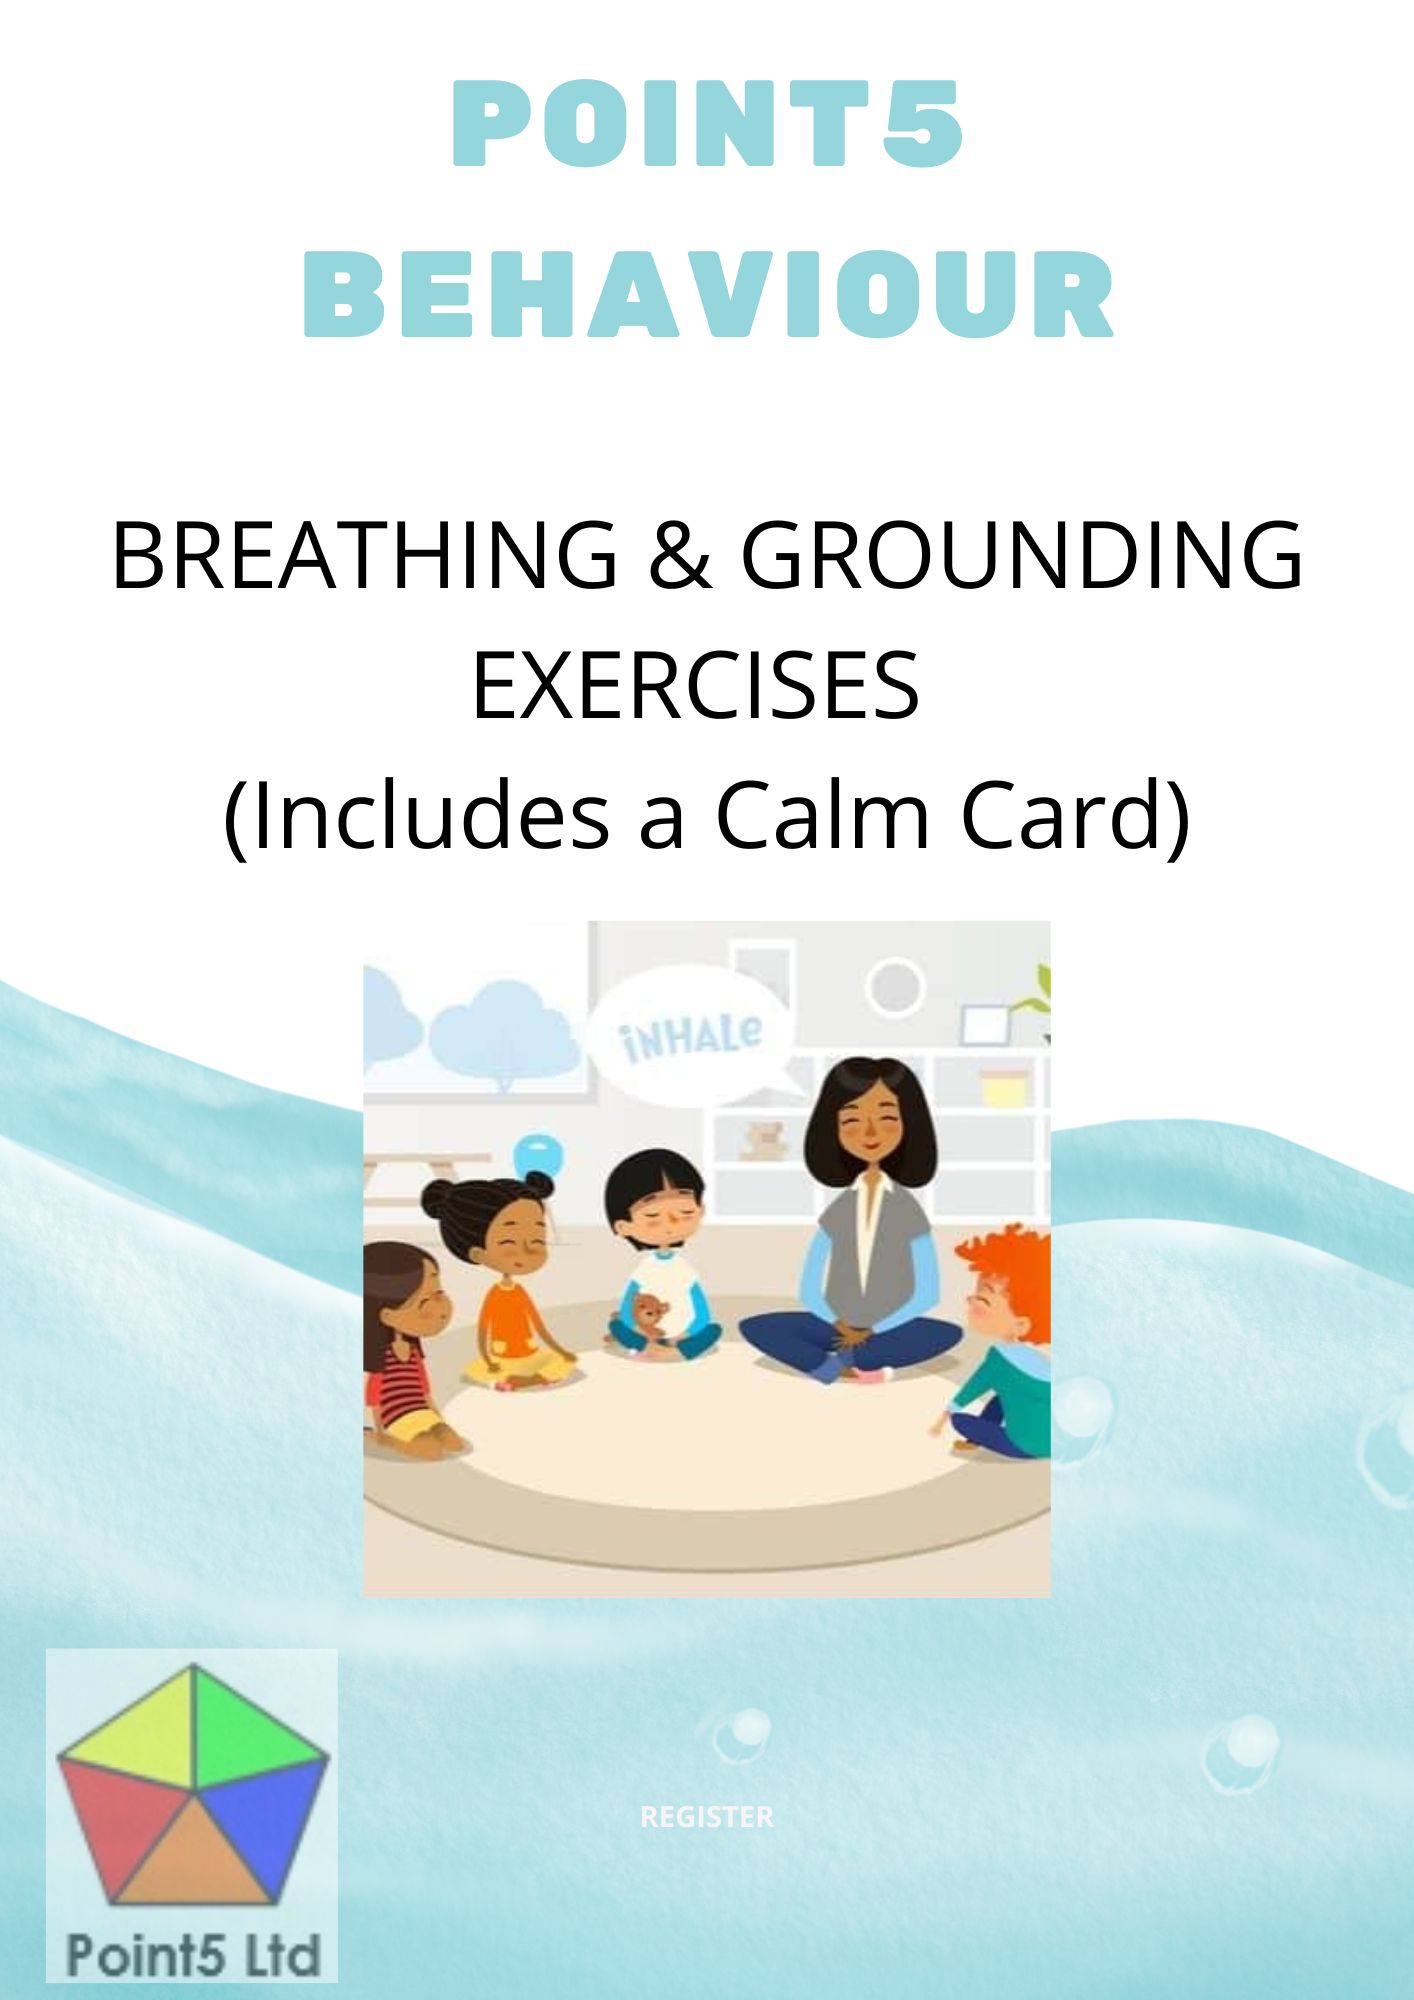 Point5 Behaviour Breathing & Grounding Exercises with Calm Card